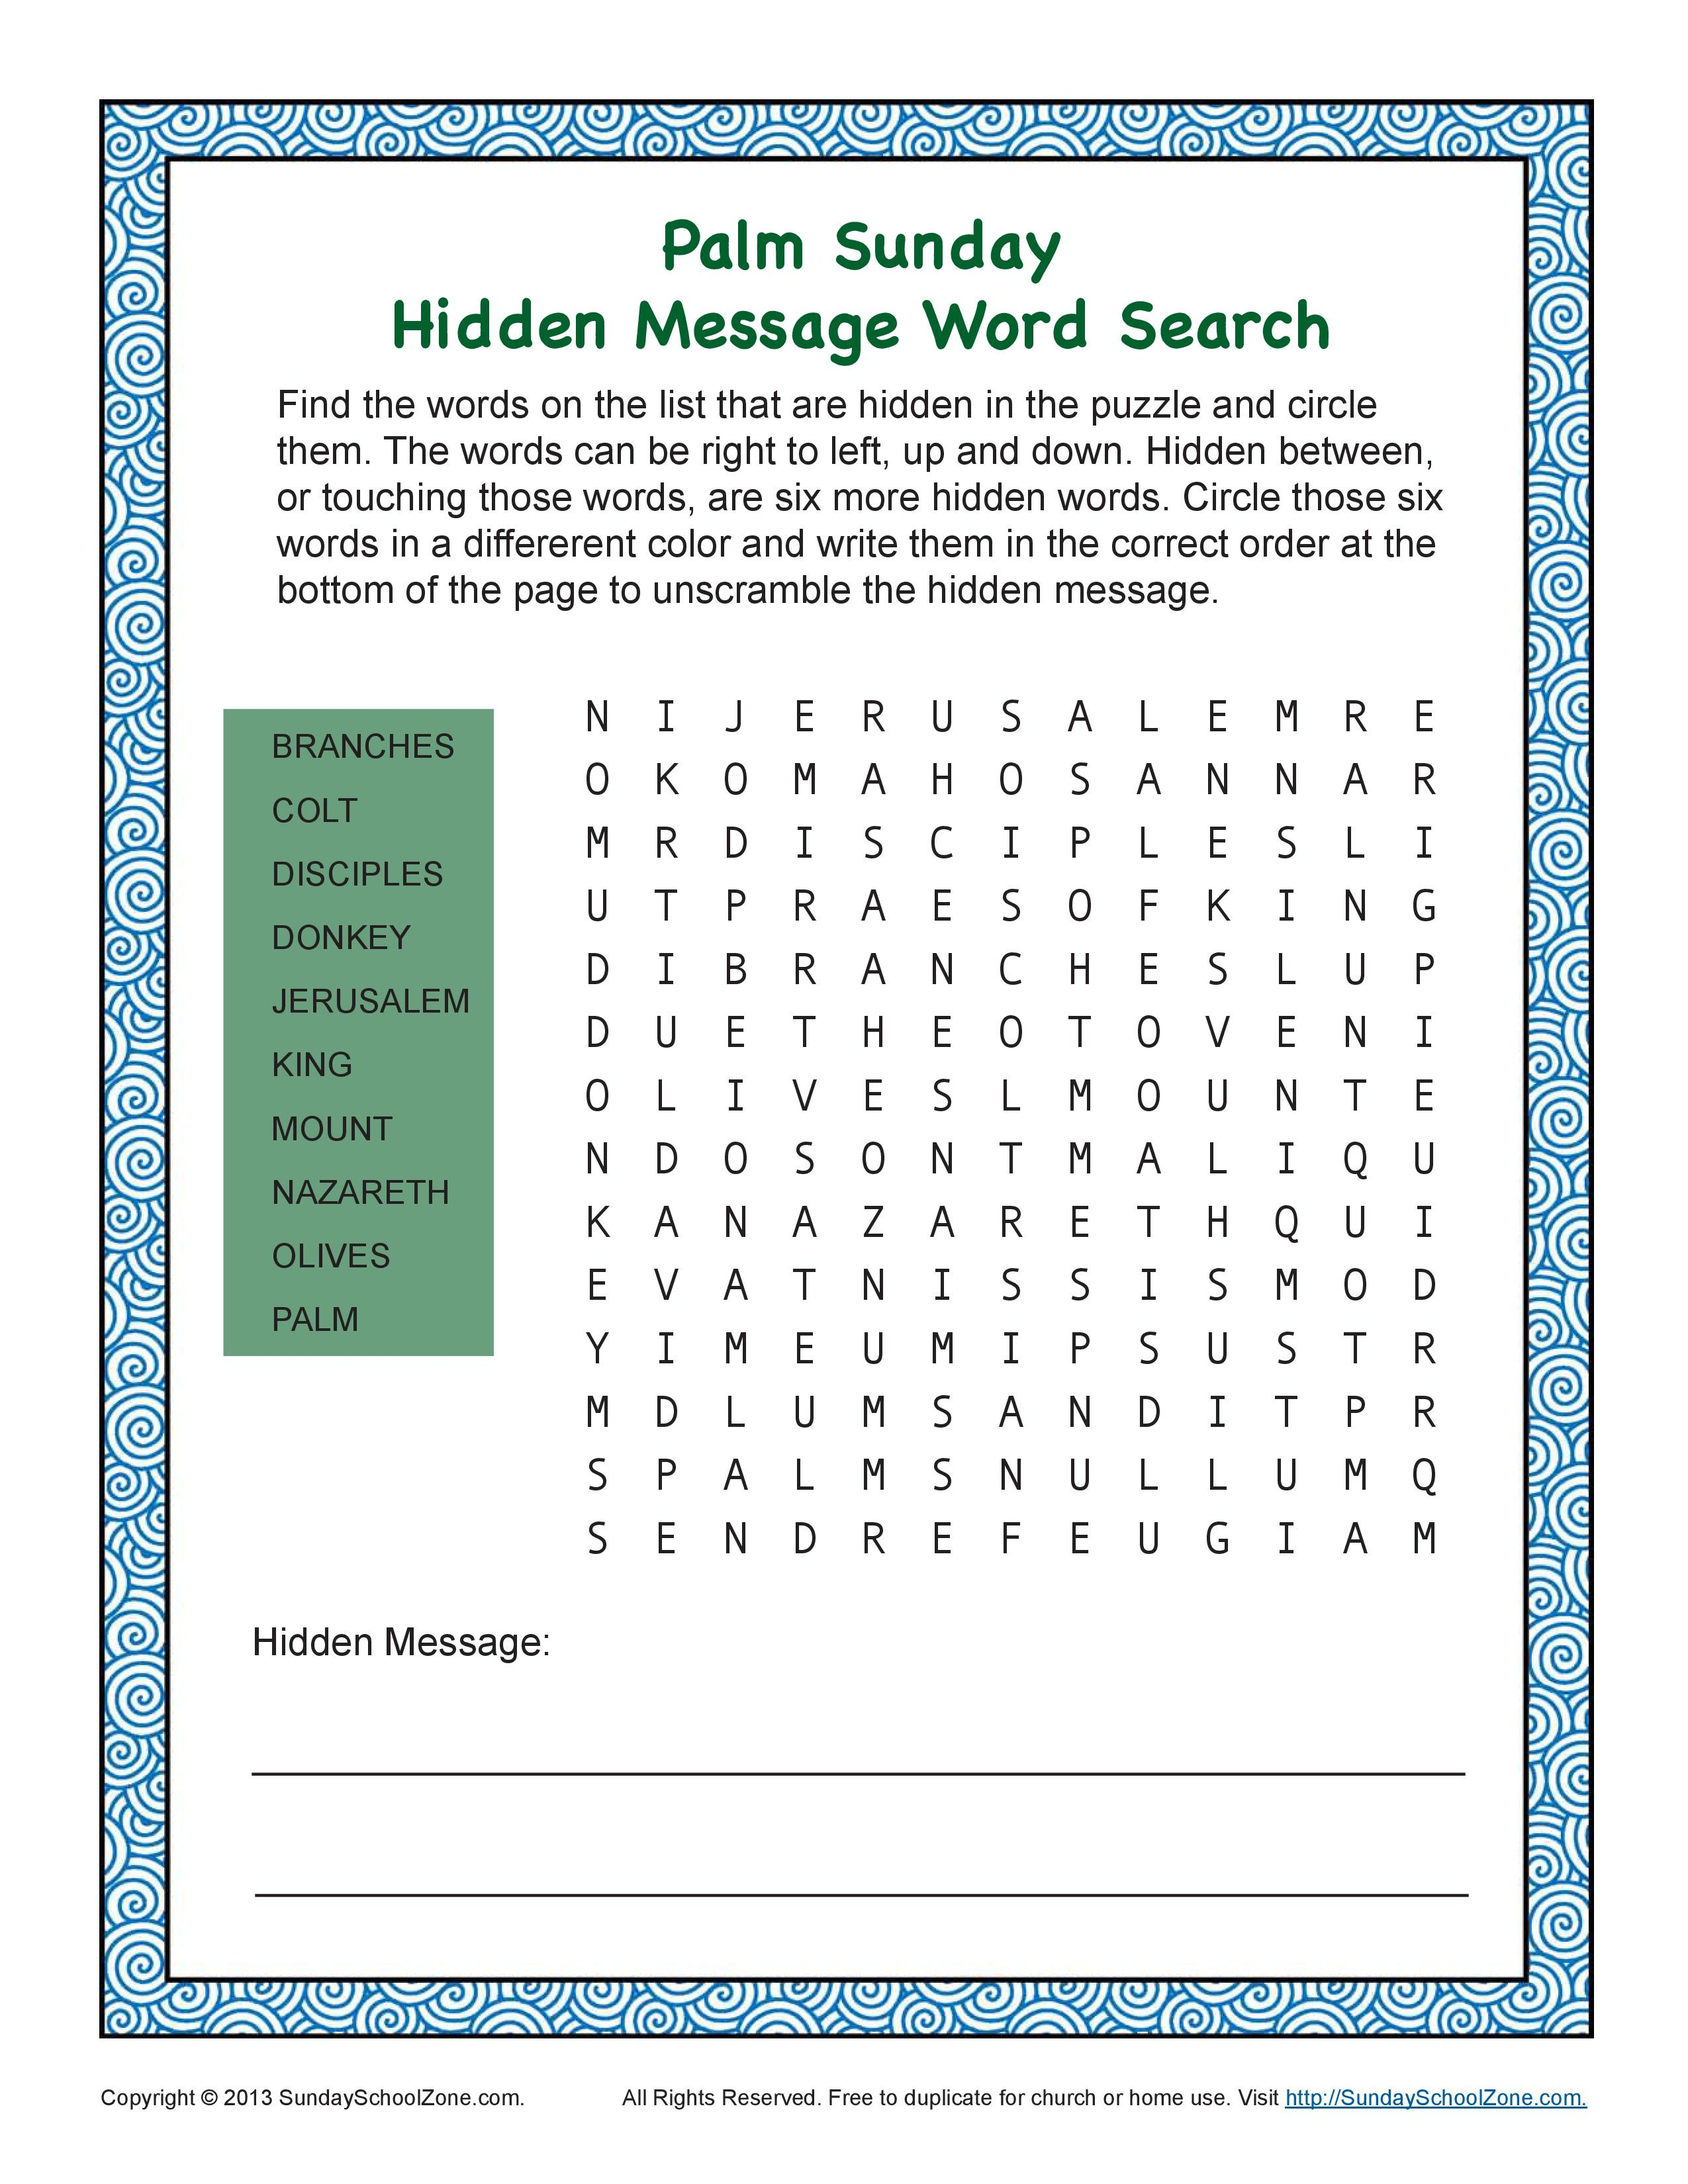 Palm Sunday Word Search Bible Activity On Sunday School Zone - Free Word Search With Hidden Message Printable